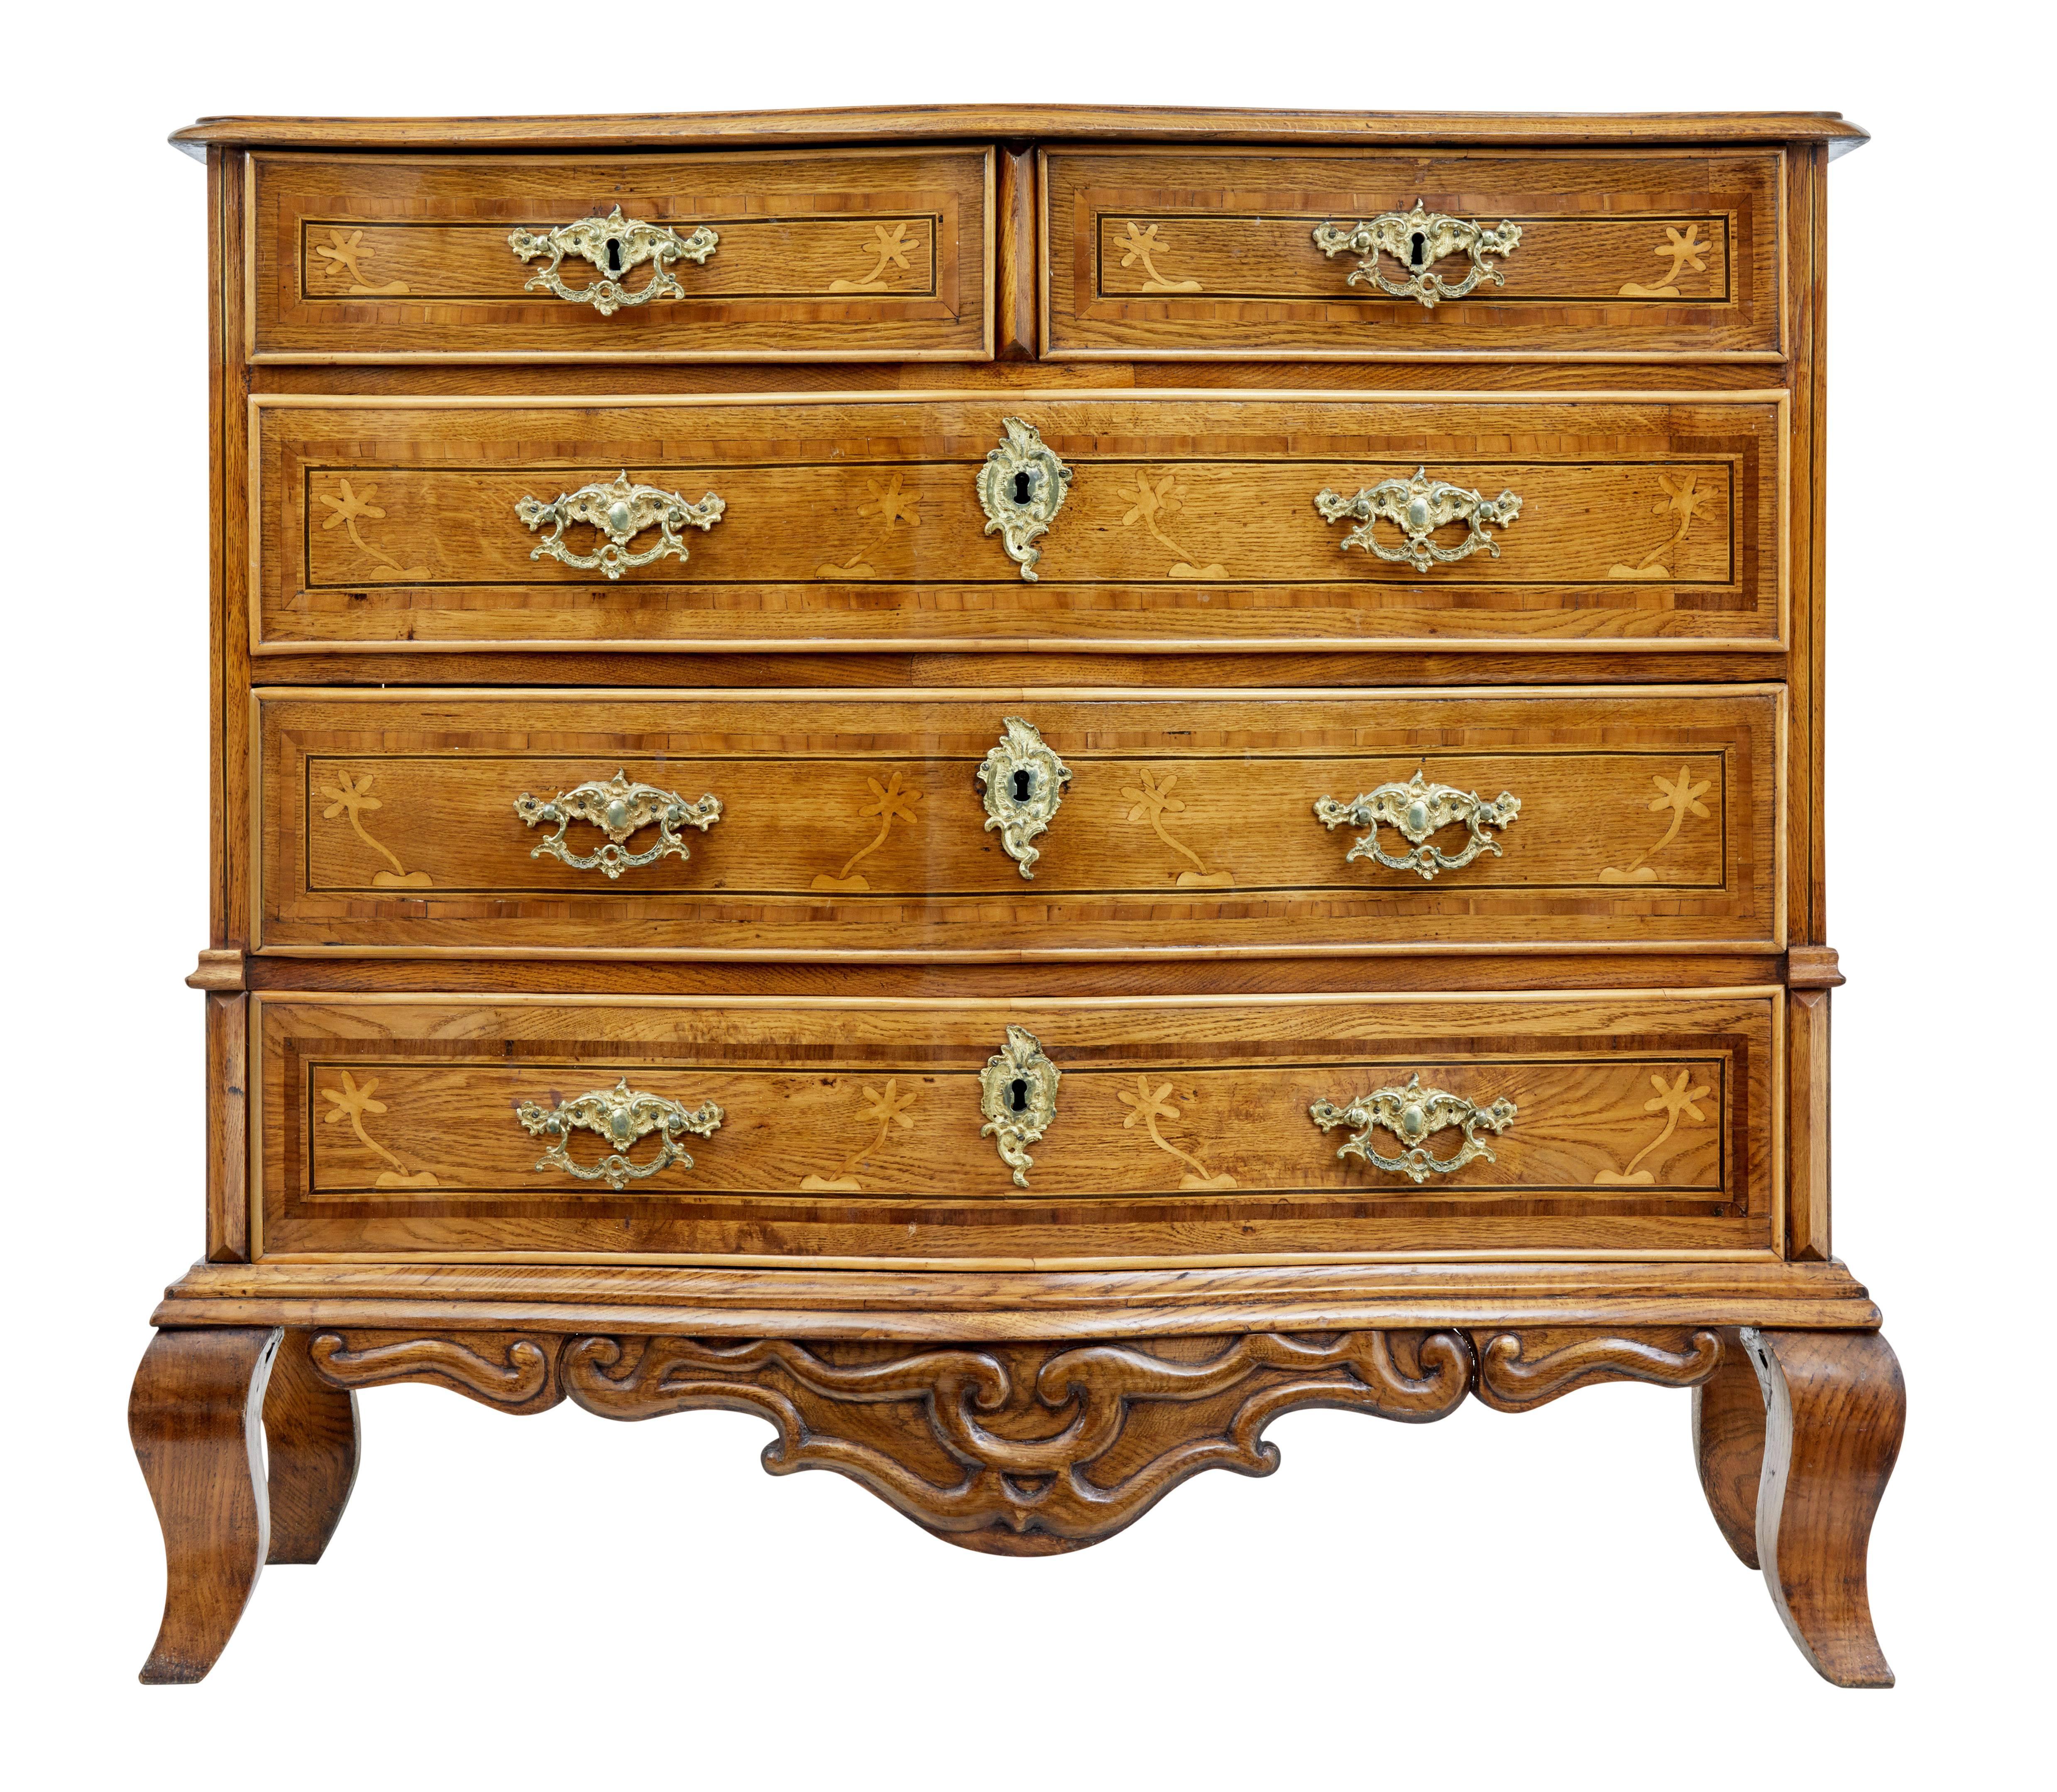 Rare Swedish oak two over three commode circa 1800.

Serpentine shape front, cock beaded edge drawers with stringing and inlay to the drawer fronts.

Inlaid birch design on the sides. Organic applied carving beneath the drawers and on the